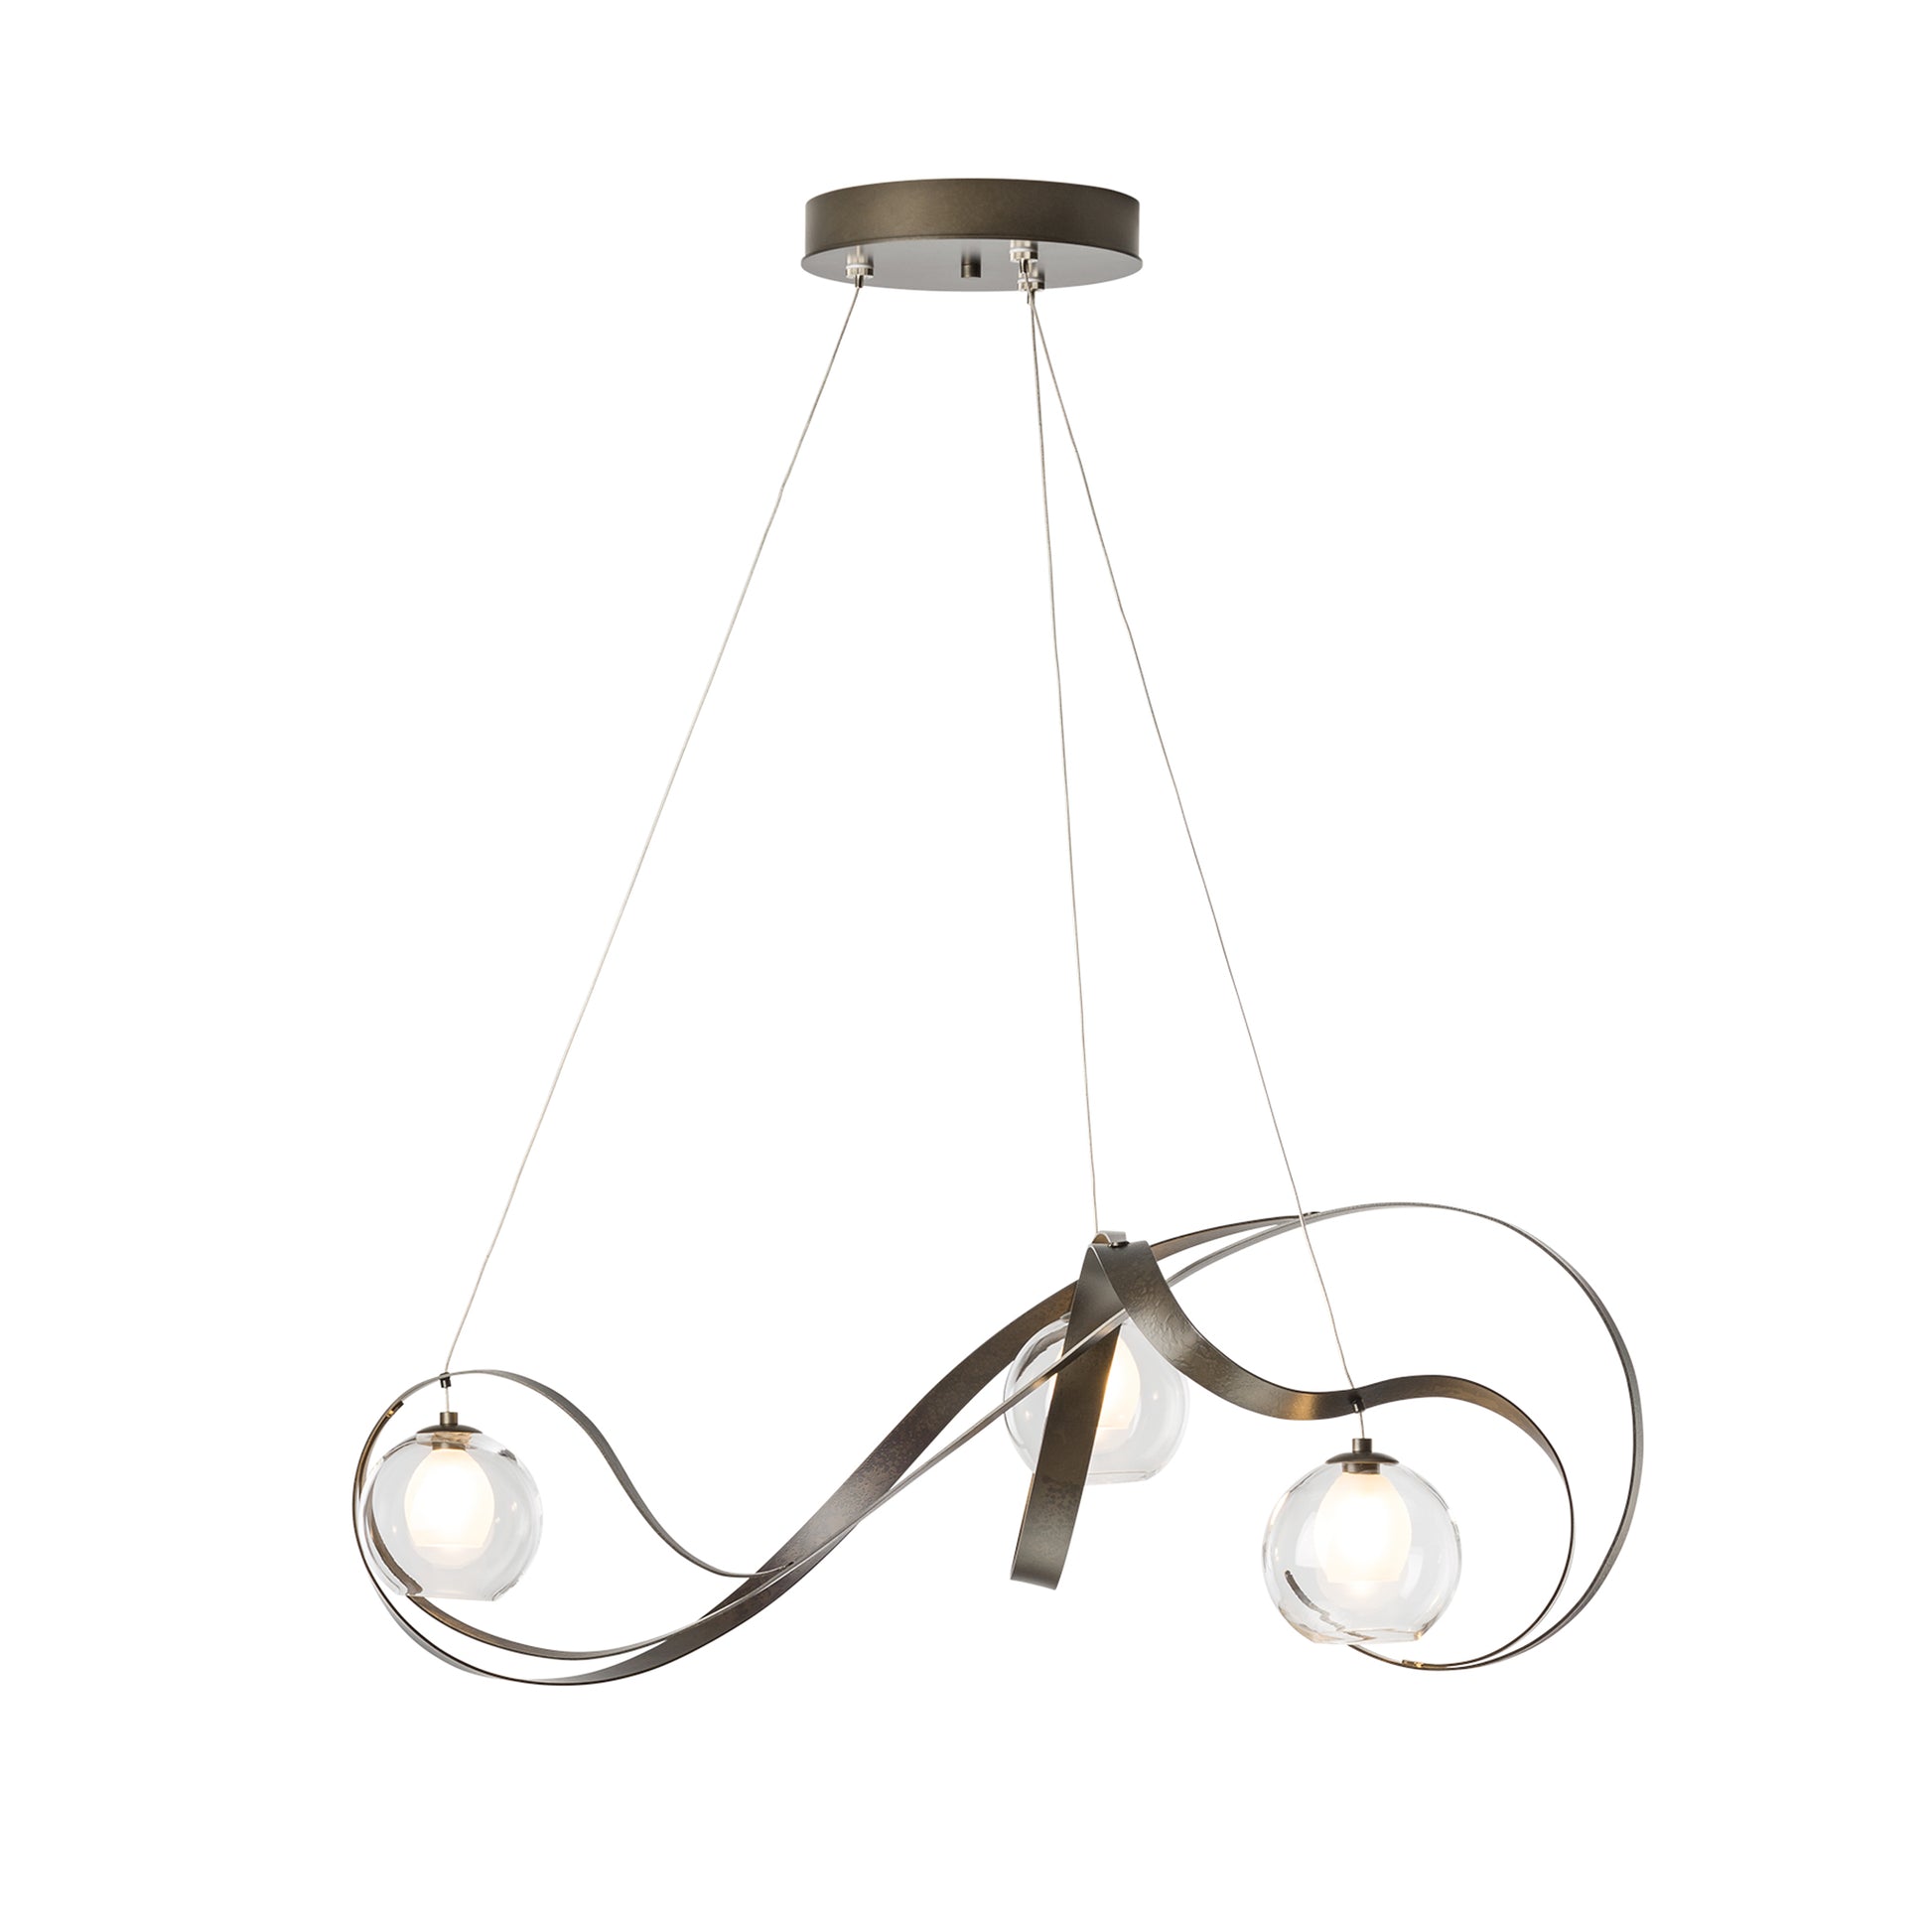 A handcrafted Karma Pendant chandelier with a metal frame and glass globes made by Hubbardton Forge.